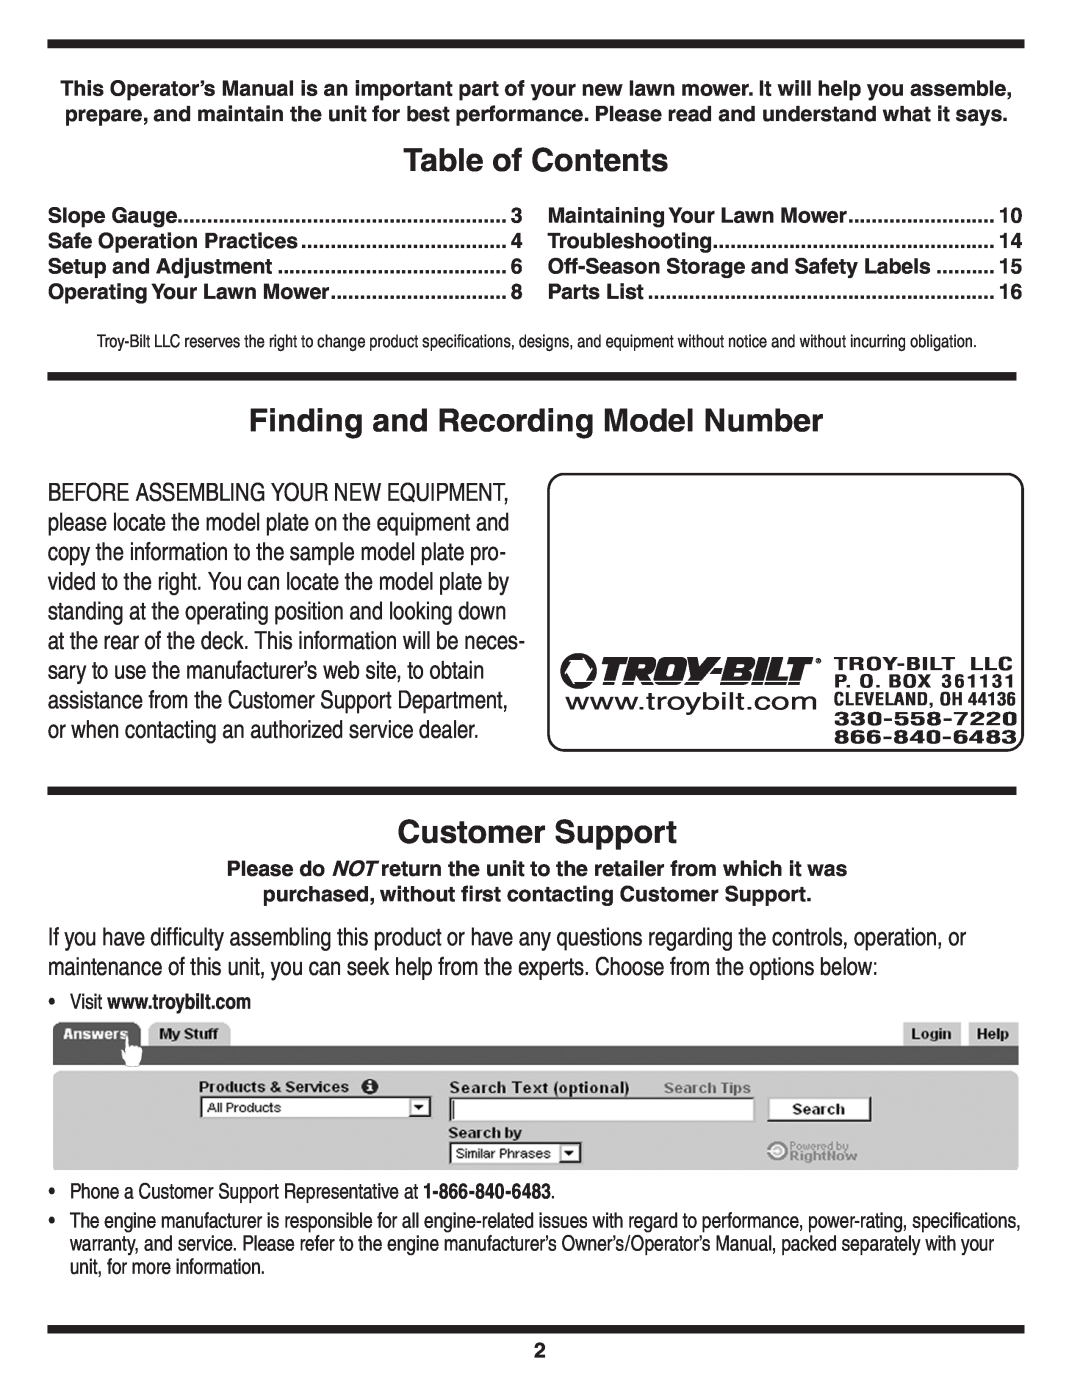 Troy-Bilt 440 warranty Table of Contents, Finding and Recording Model Number, Customer Support 